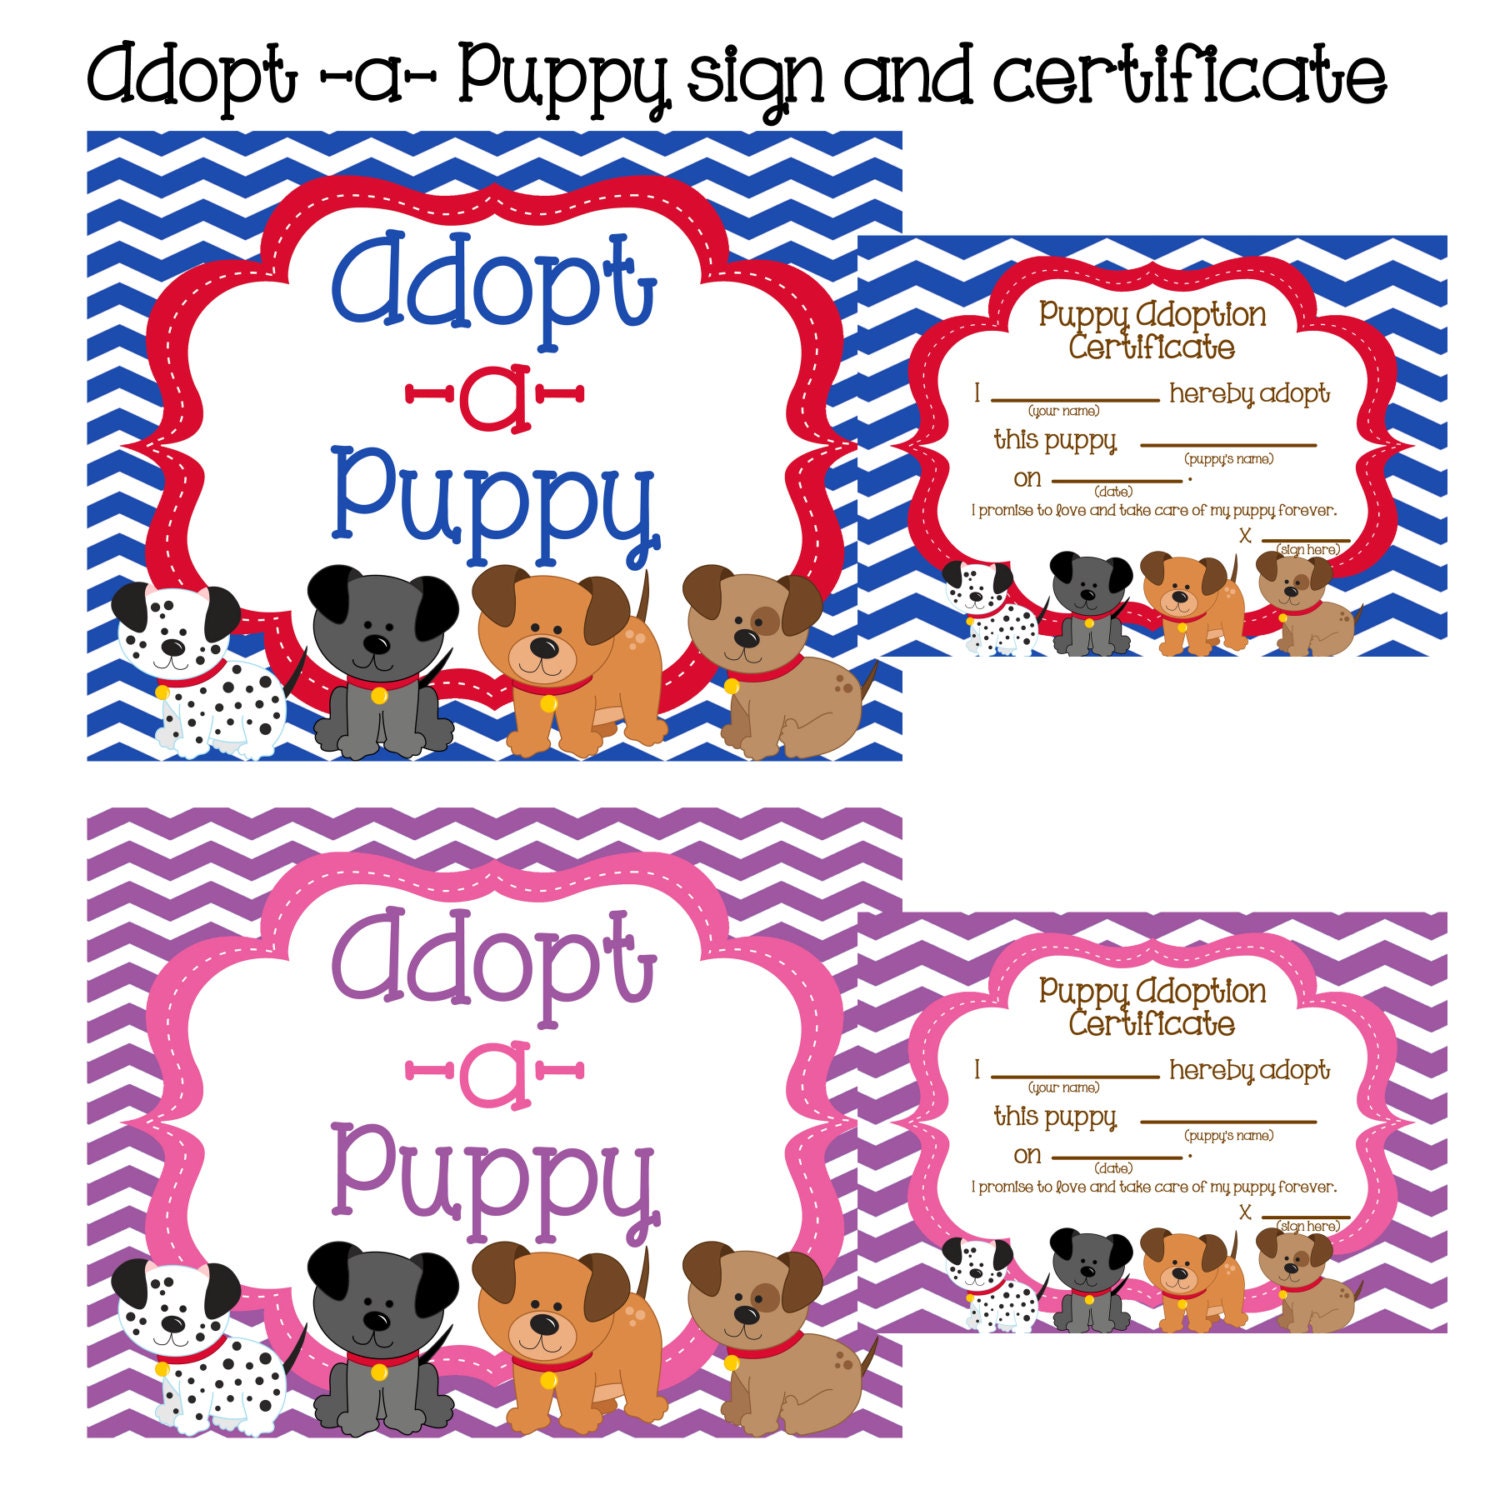 adopt-a-puppy-sign-and-certificates